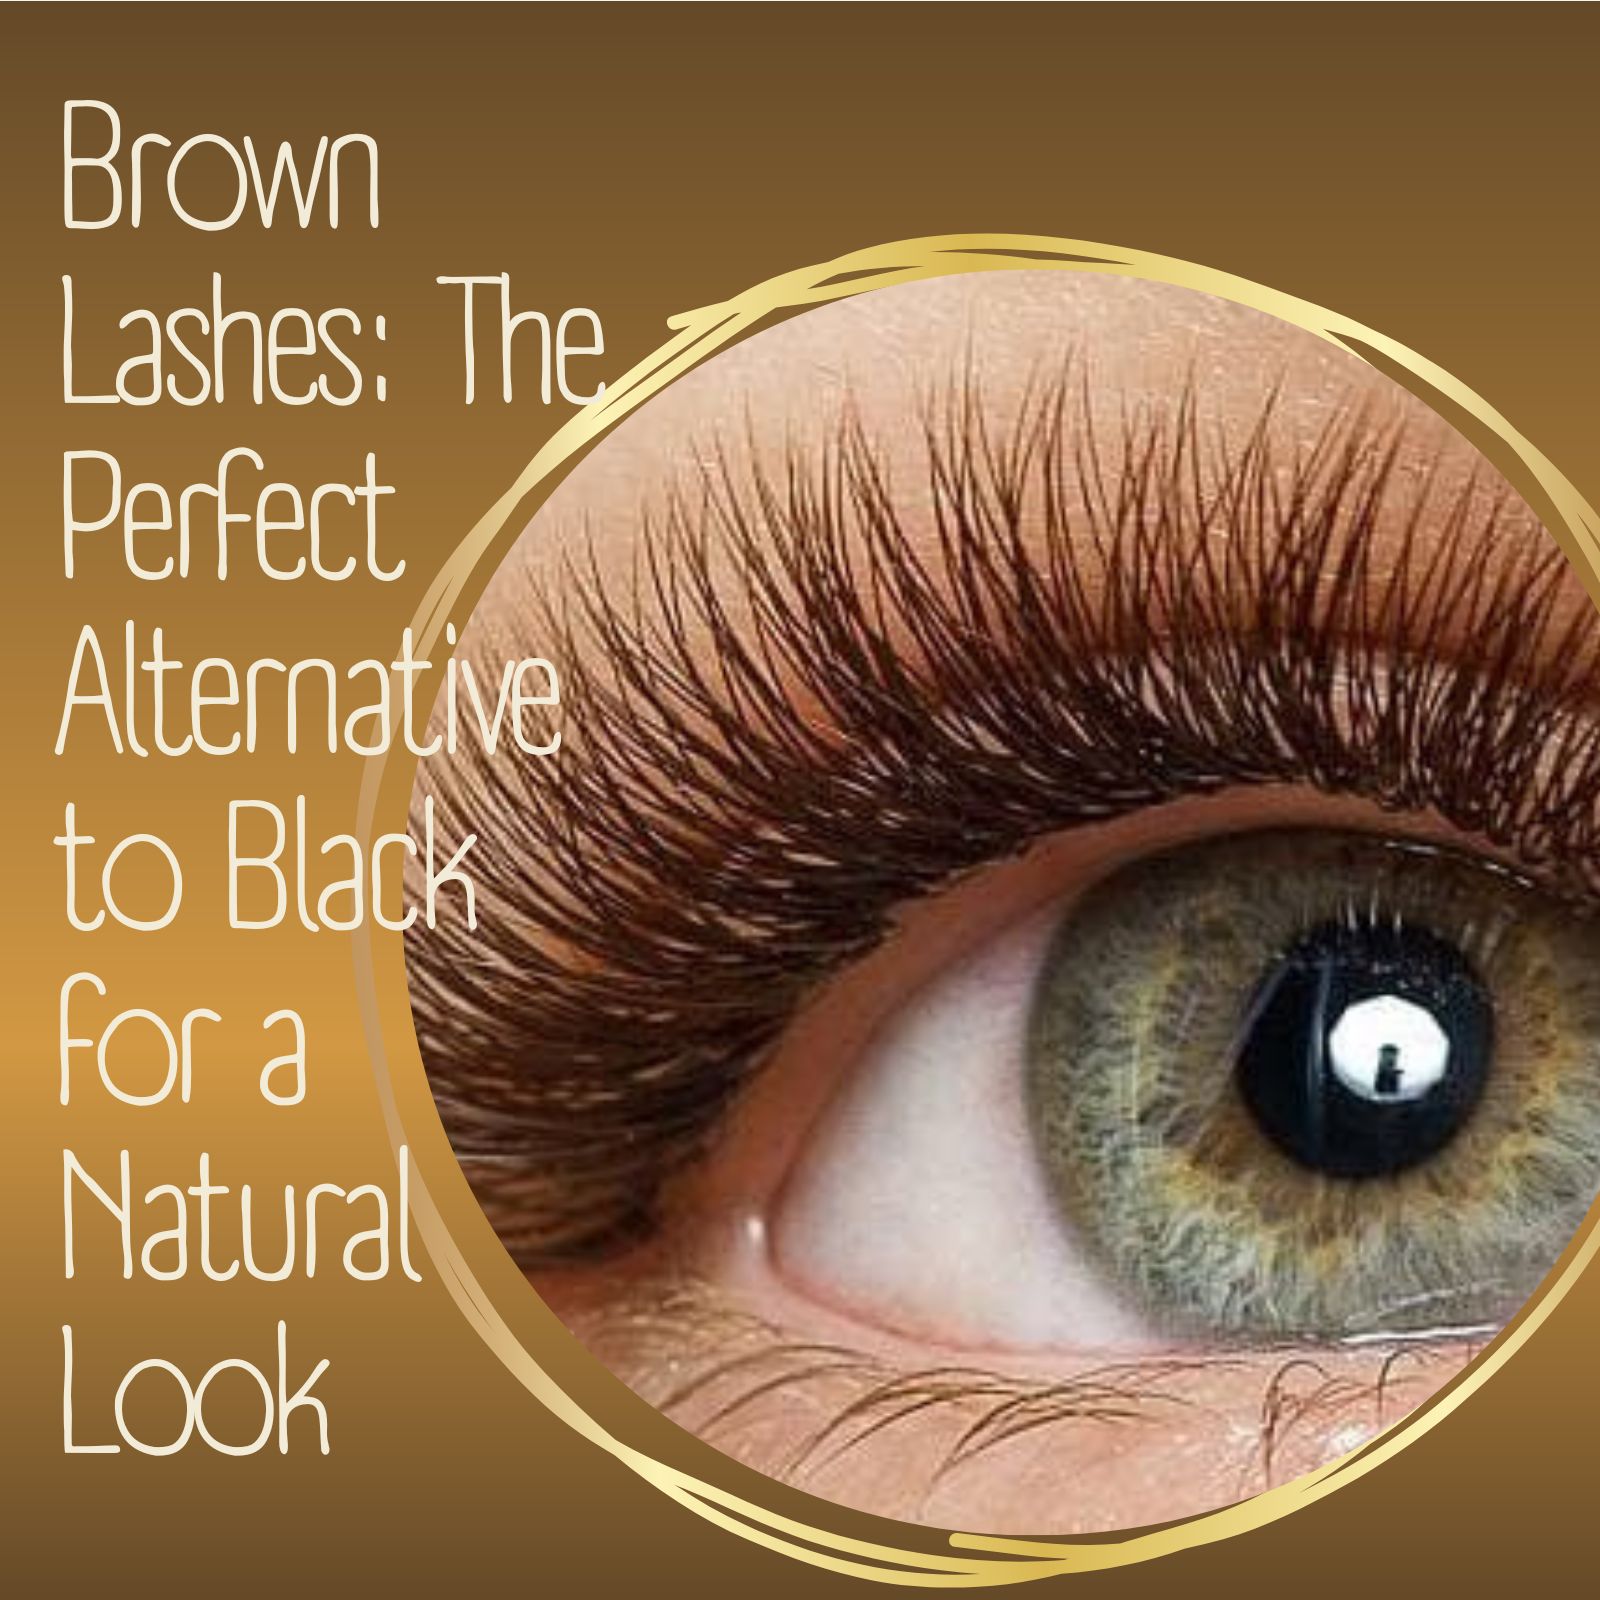 Brown Lashes: The Perfect Alternative to Black for a Natural Look